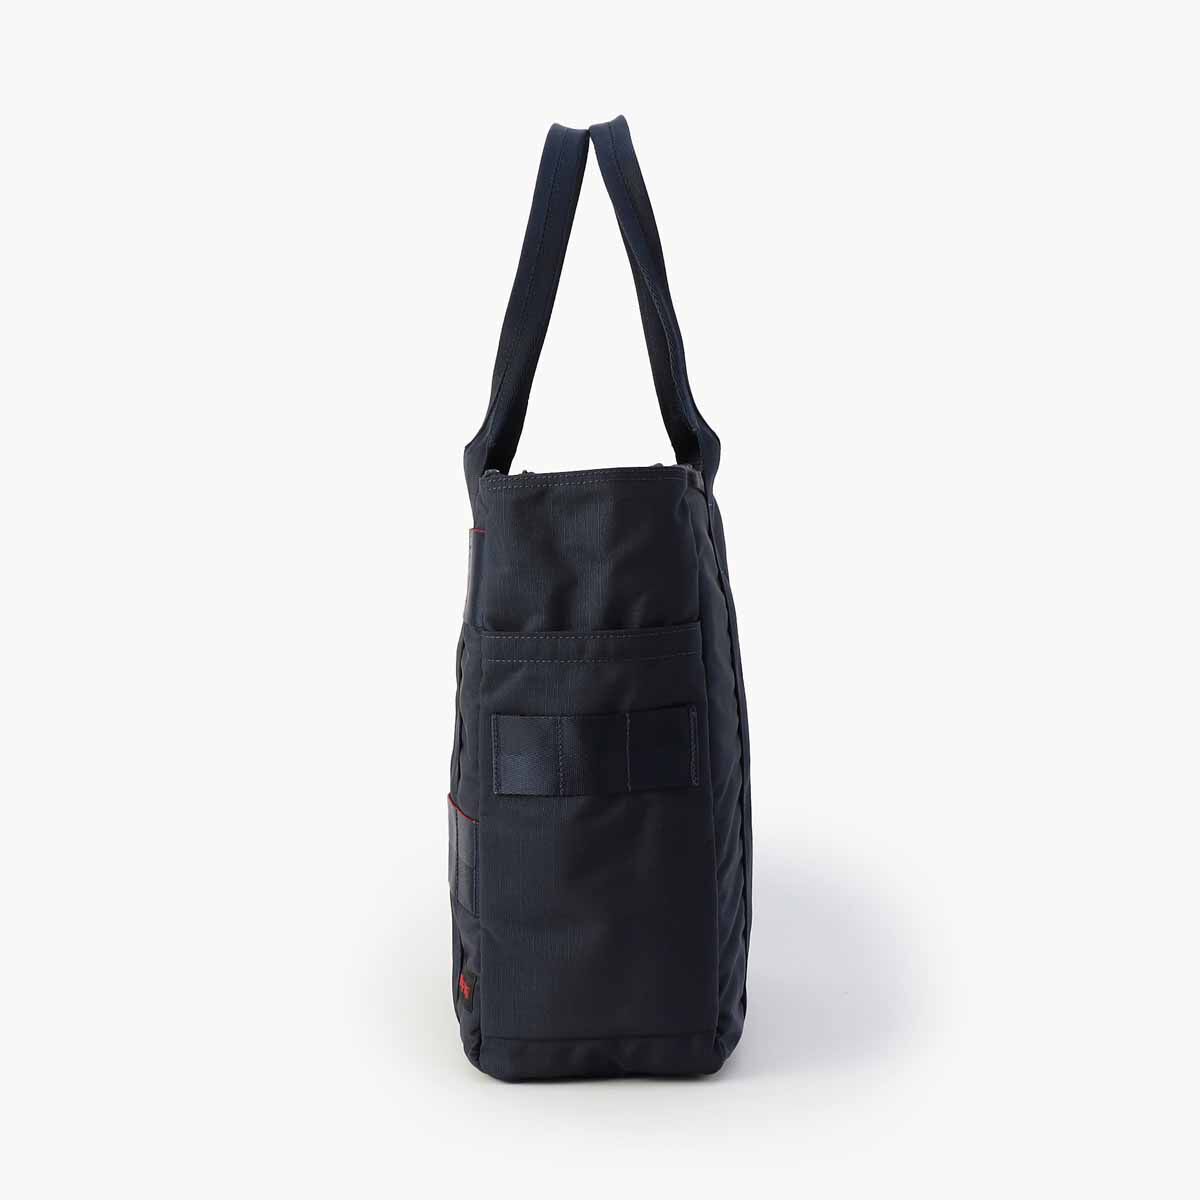 Buy PROTECTION TOTE MW GENⅡ for IDR 8719800.00 | BRIEFING